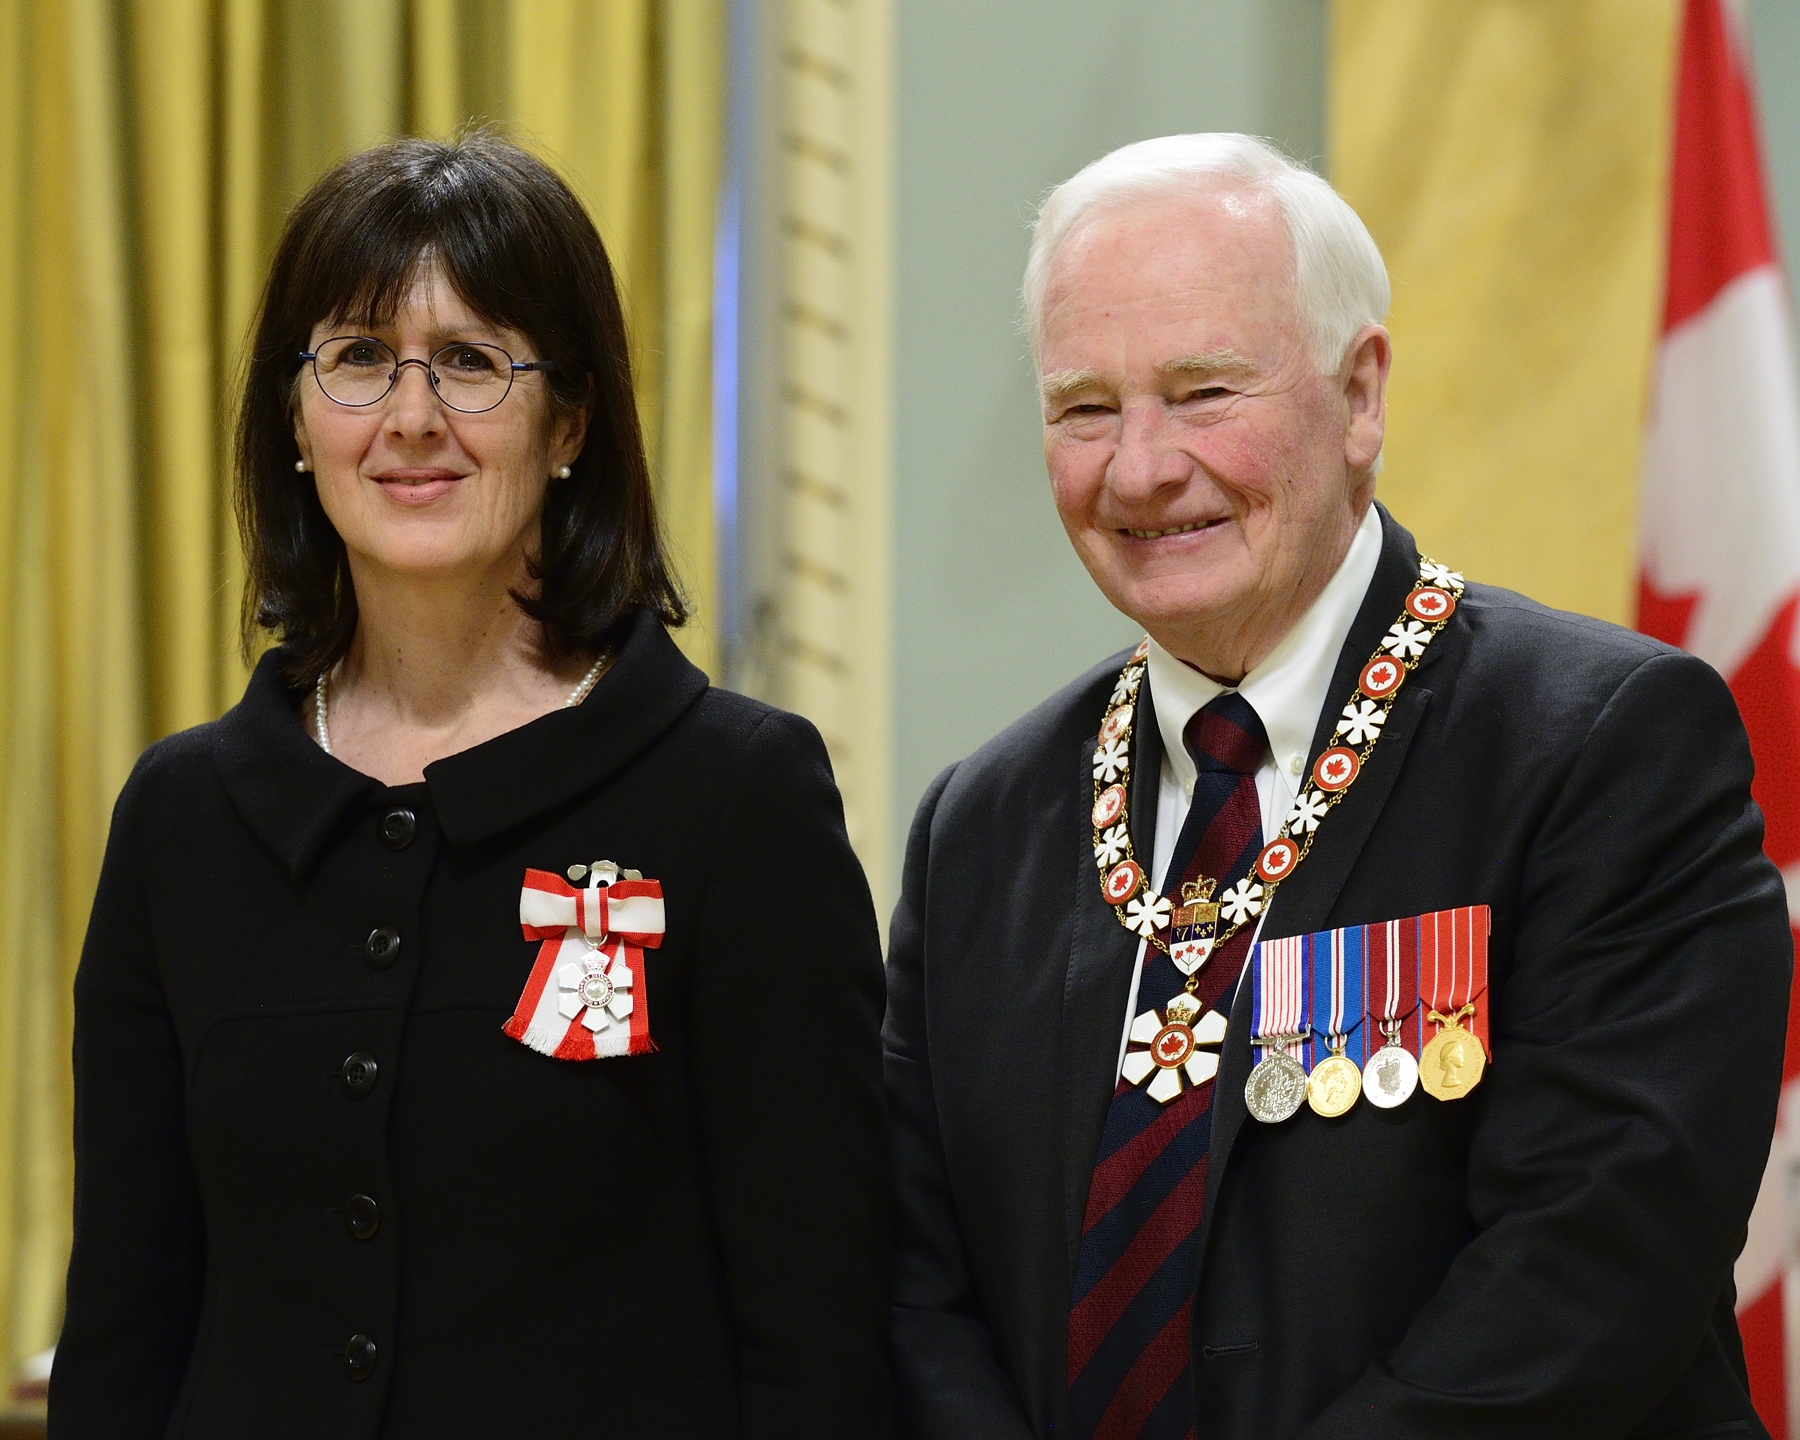 GG05-2017-0029-067
February 17, 2017
Rideau Hall, Ottawa, Ontario, Canada

His Excellency presents the Member insignia of the Order of Canada to Linda Cardinal, C.M.

His Excellency the Right Honourable David Johnston, Governor General of Canada, invested 3 Companions, 11 Officers and 28 Members into the Order of Canada during a special ceremony held at Rideau Hall on February 17, 2017. 

The ceremony also marked the official release of the book They Desire a Better Country: The Order of Canada in 50 Stories, a collection of inspiring stories celebrating the 50th anniversary of the creation of the Order.

Credit: Sgt Johanie Maheu, Rideau Hall, OSGG